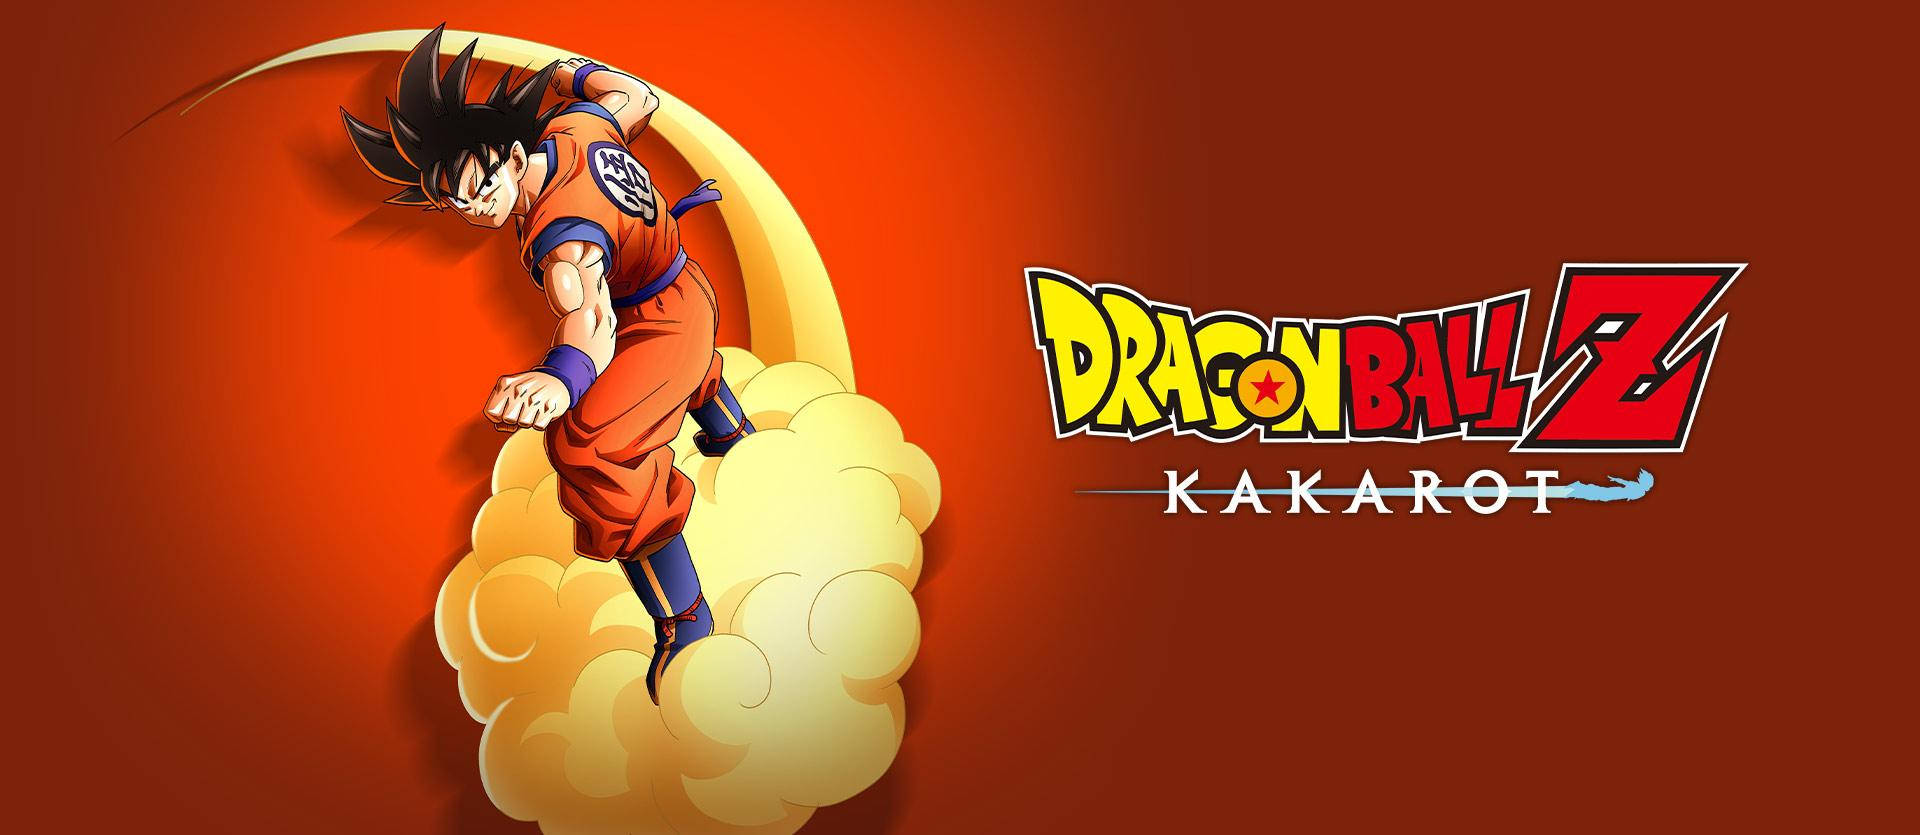 Dragon Ball Z Logo Against A Red And White Background Wallpaper